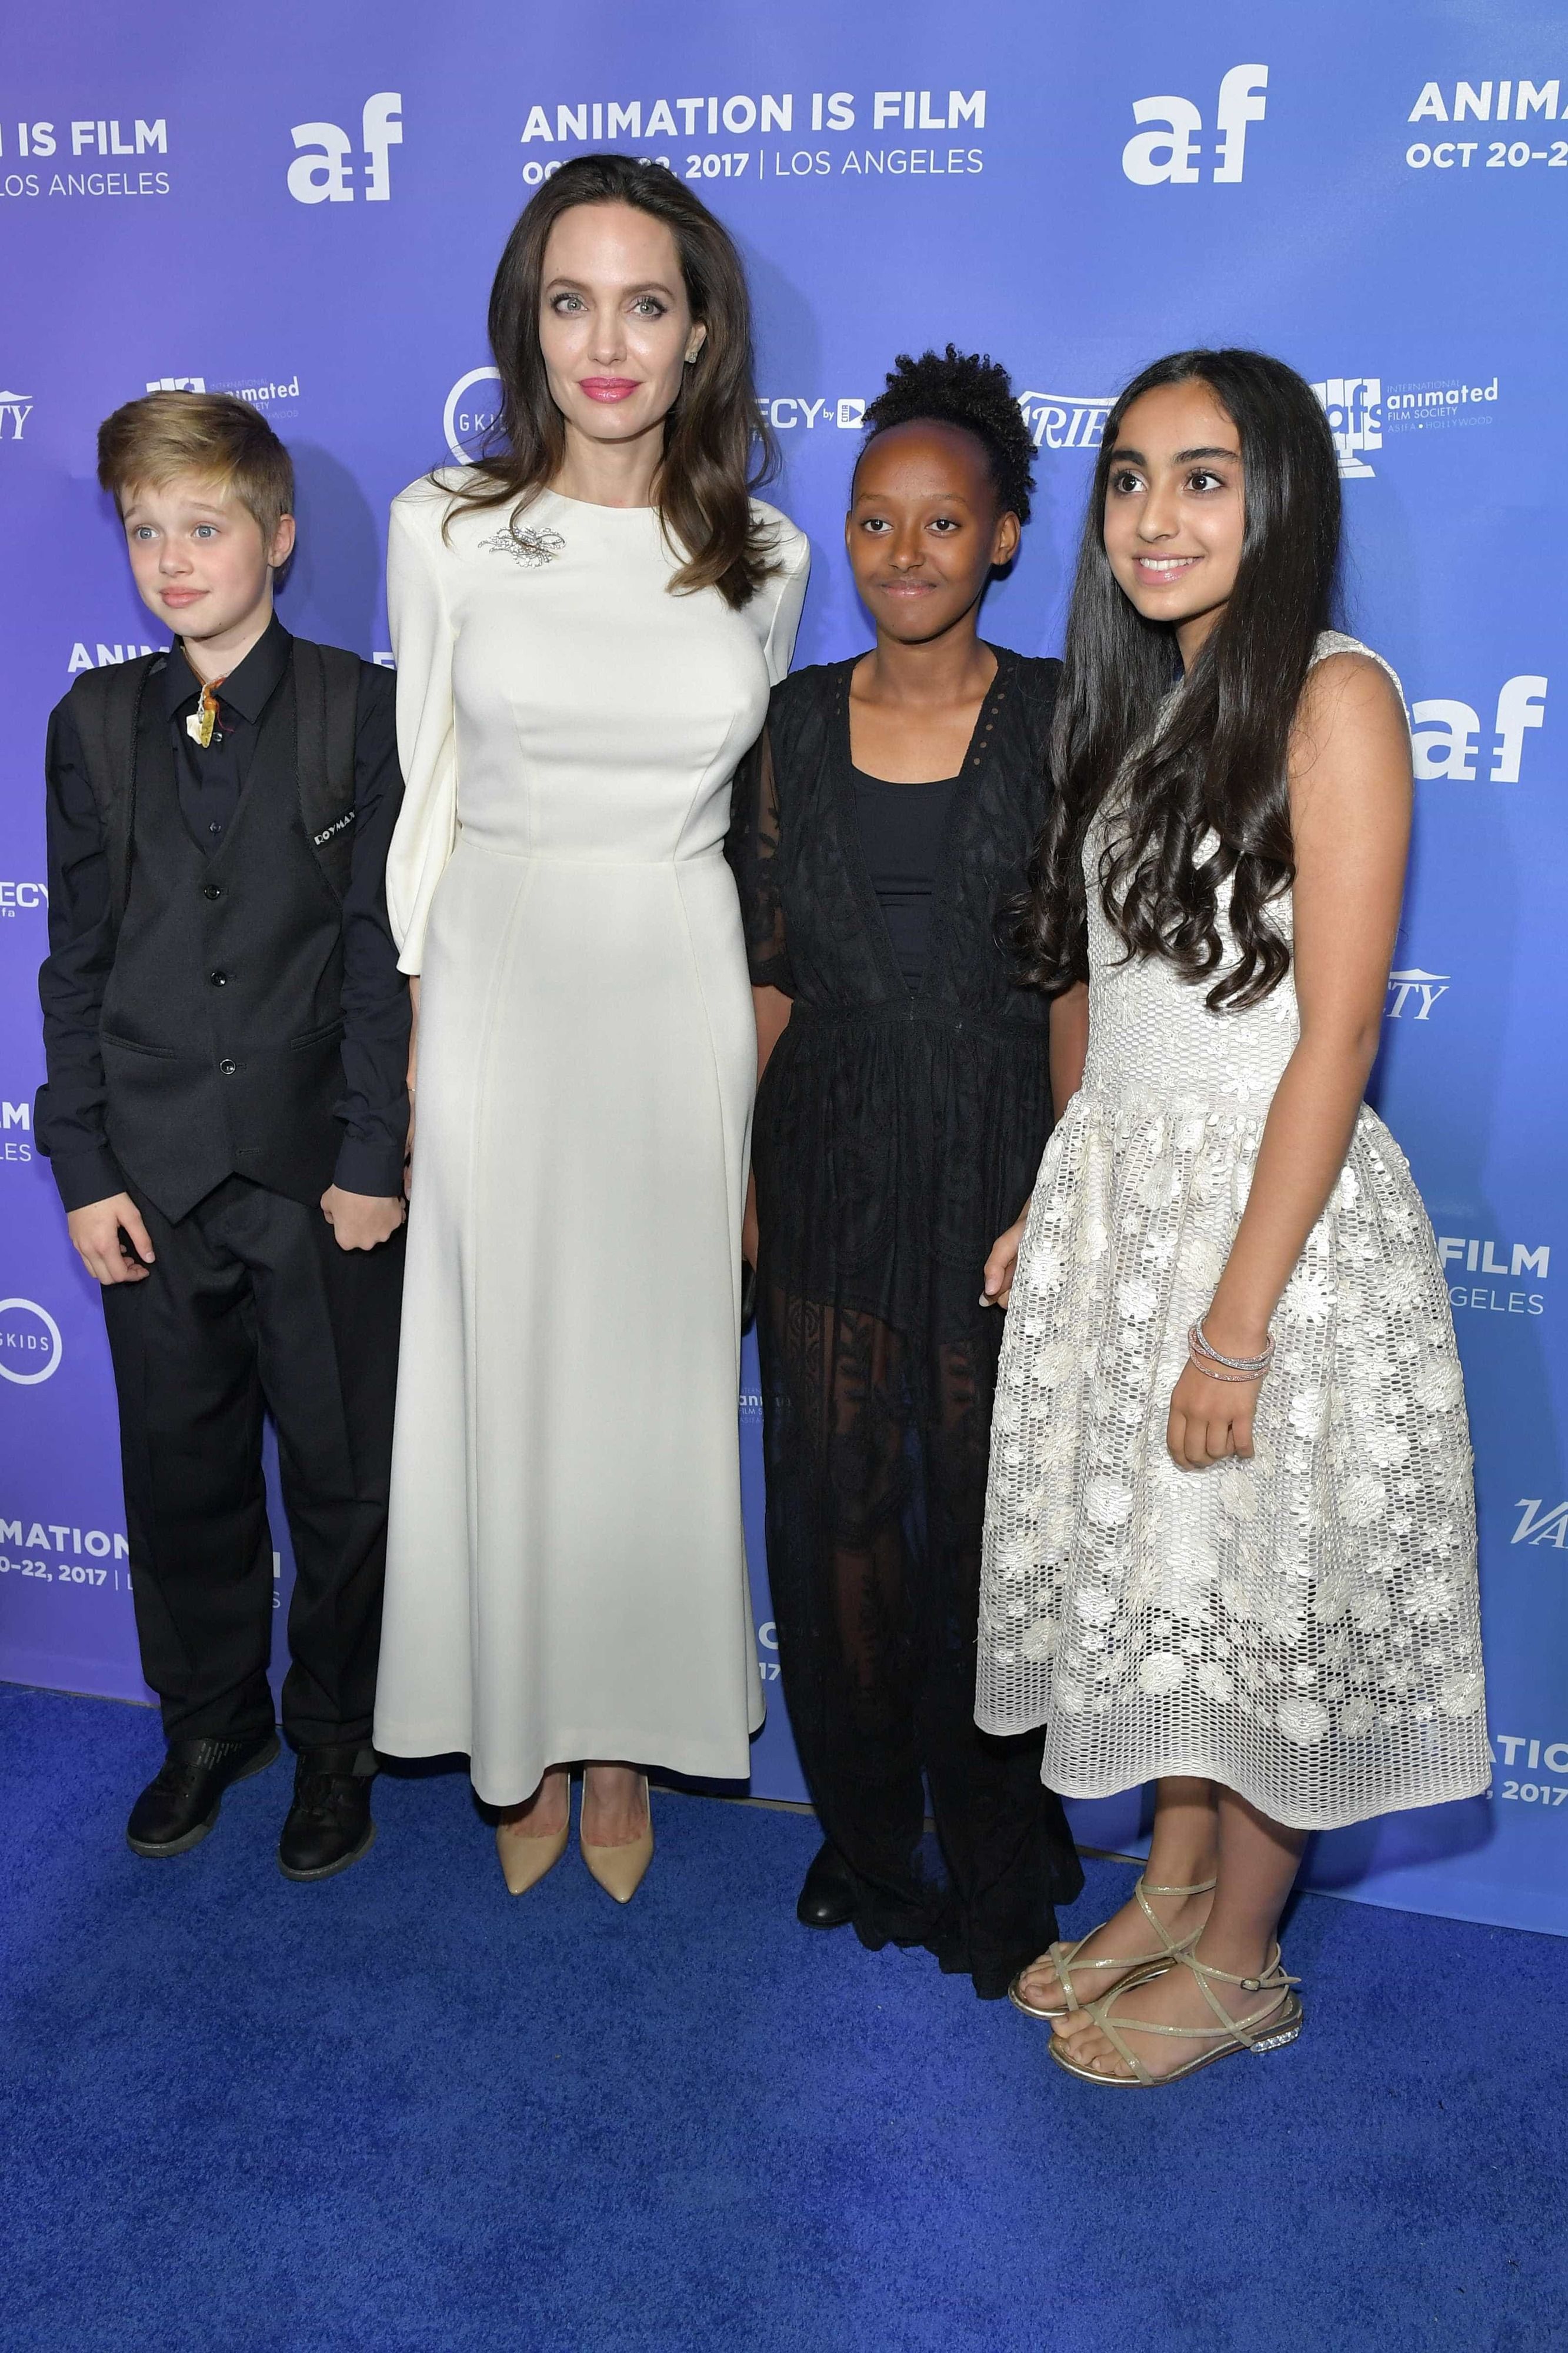 Angelina Jolie and children Shiloh, Saara, and Zahara Marley Jolie-Pitt on October 20, 2017 in Hollywood, California. | Photo: Getty Images